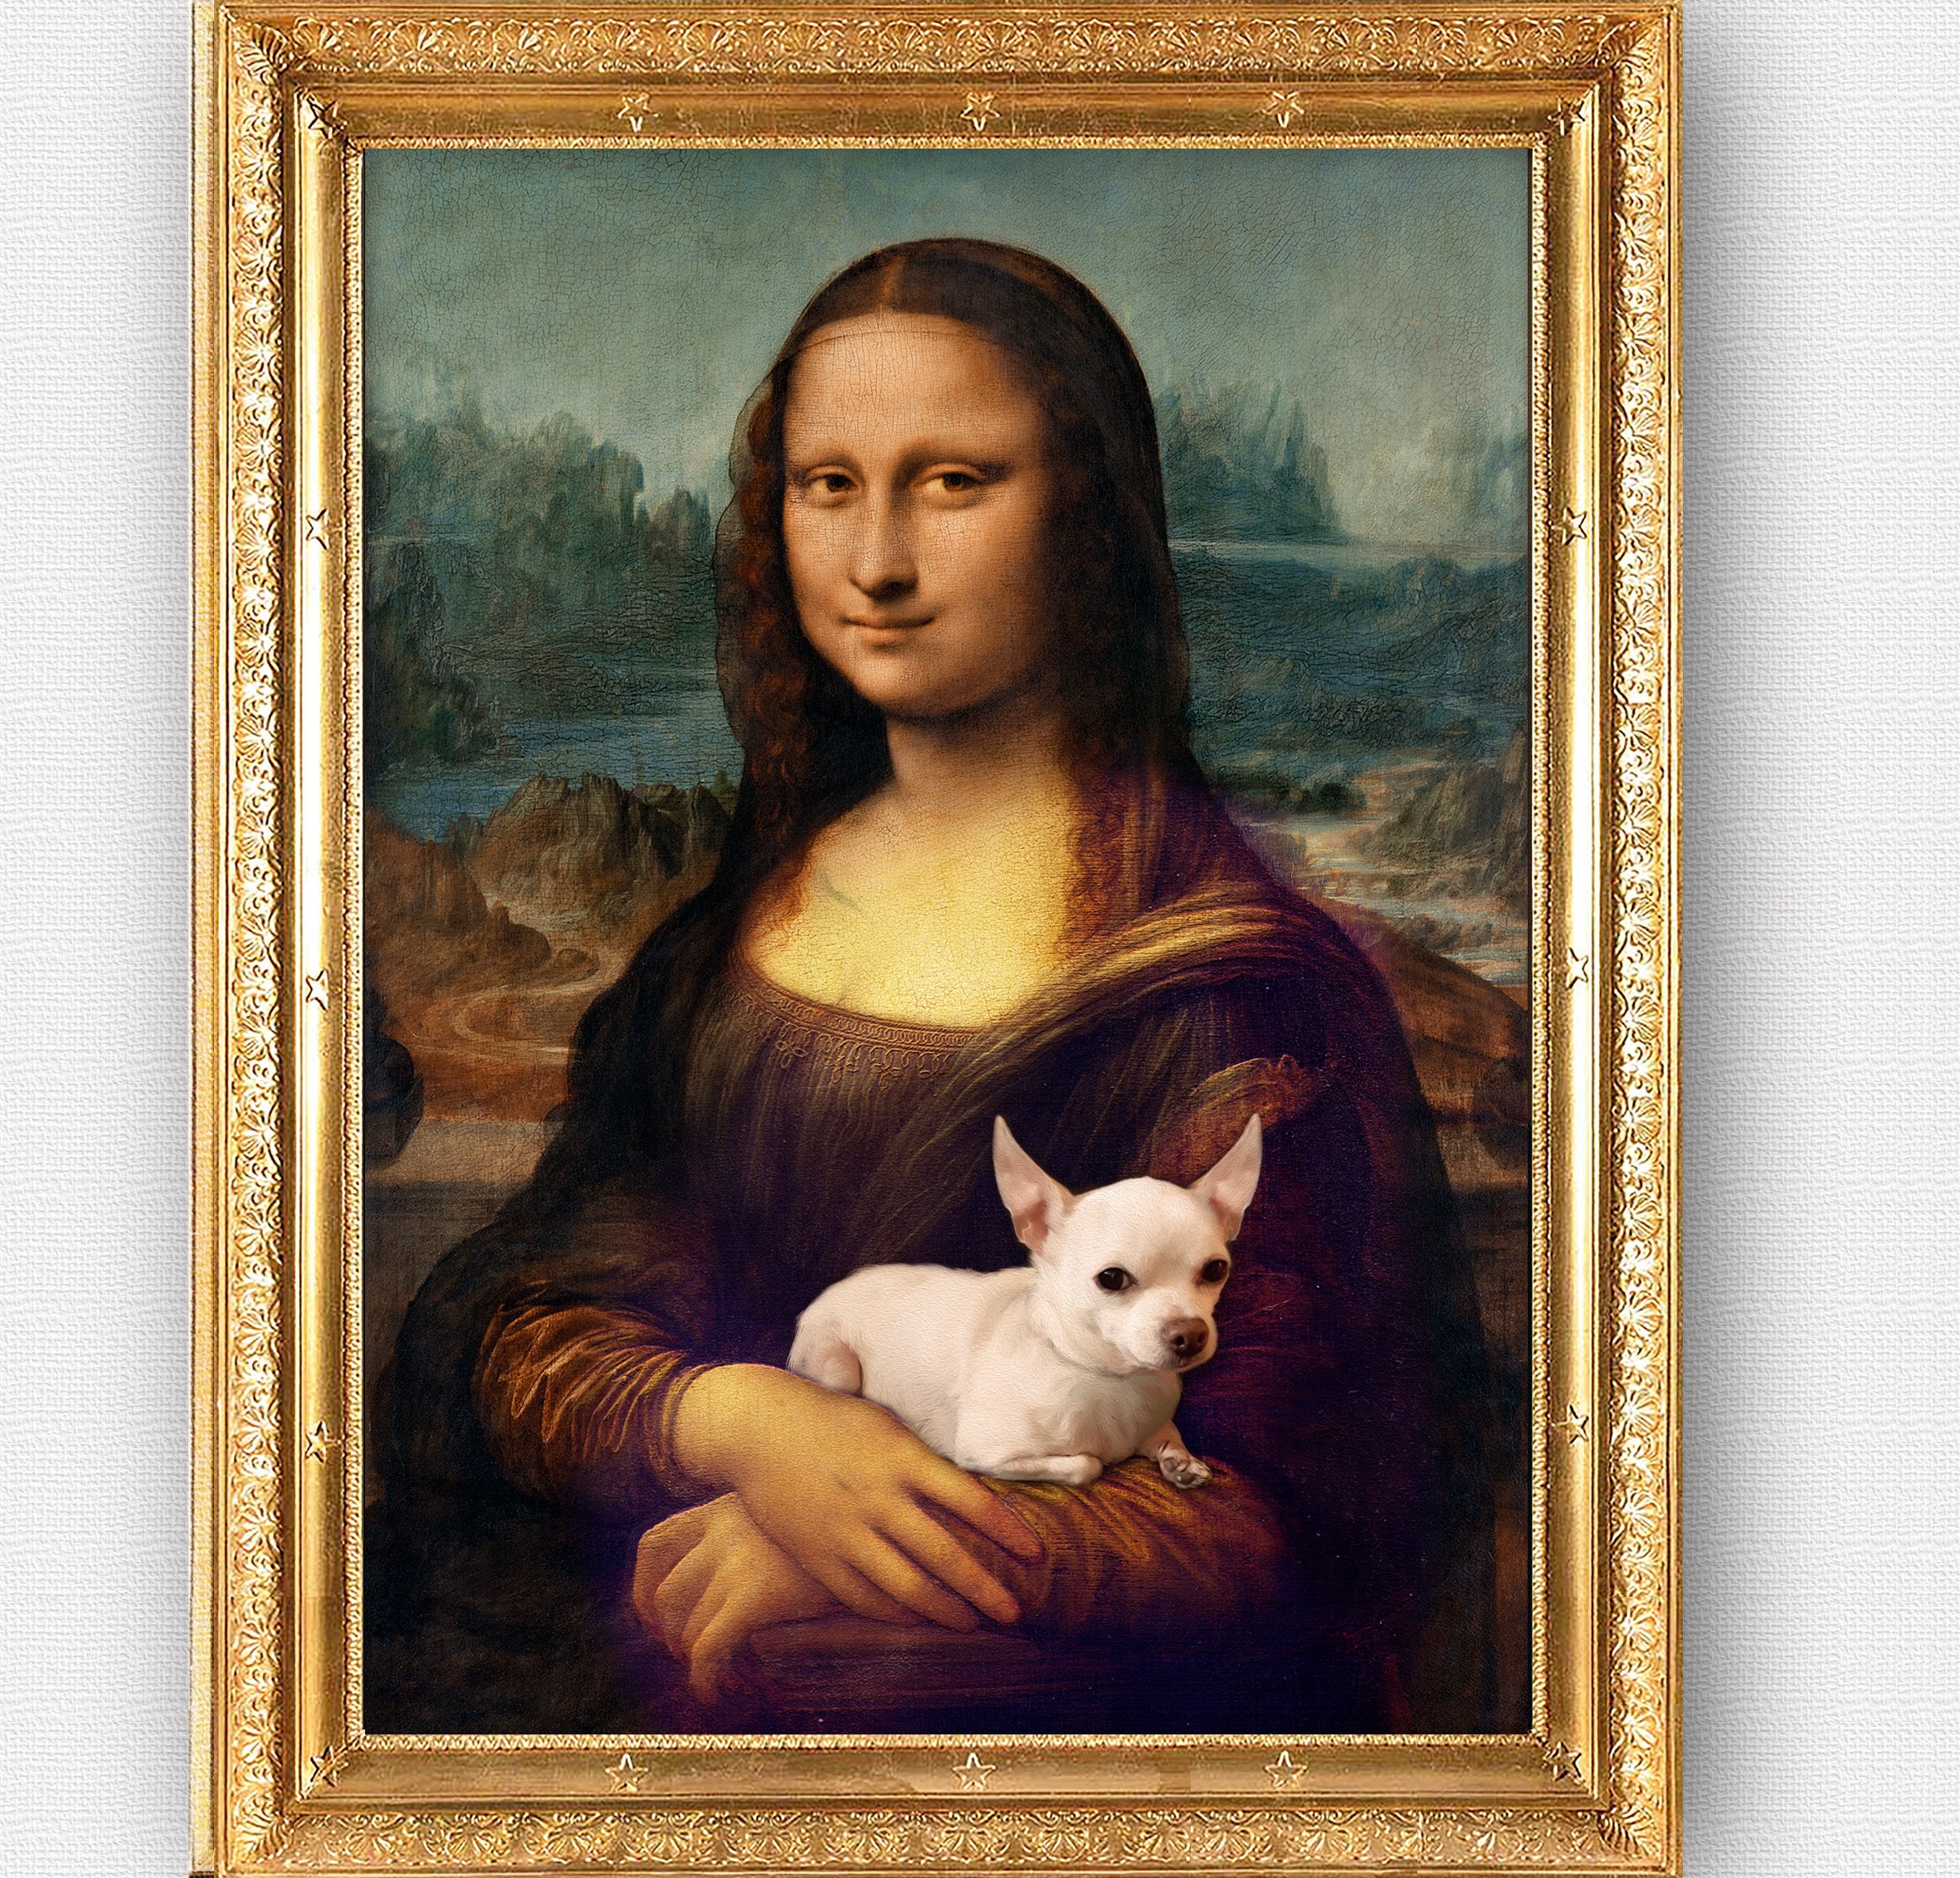 Mona Lisa Customizable Portrait for Woman, Classic Mona Lisa, Portrait From  Photo, Remastered Mona Lisa, Replace Face, Gift for Friends 